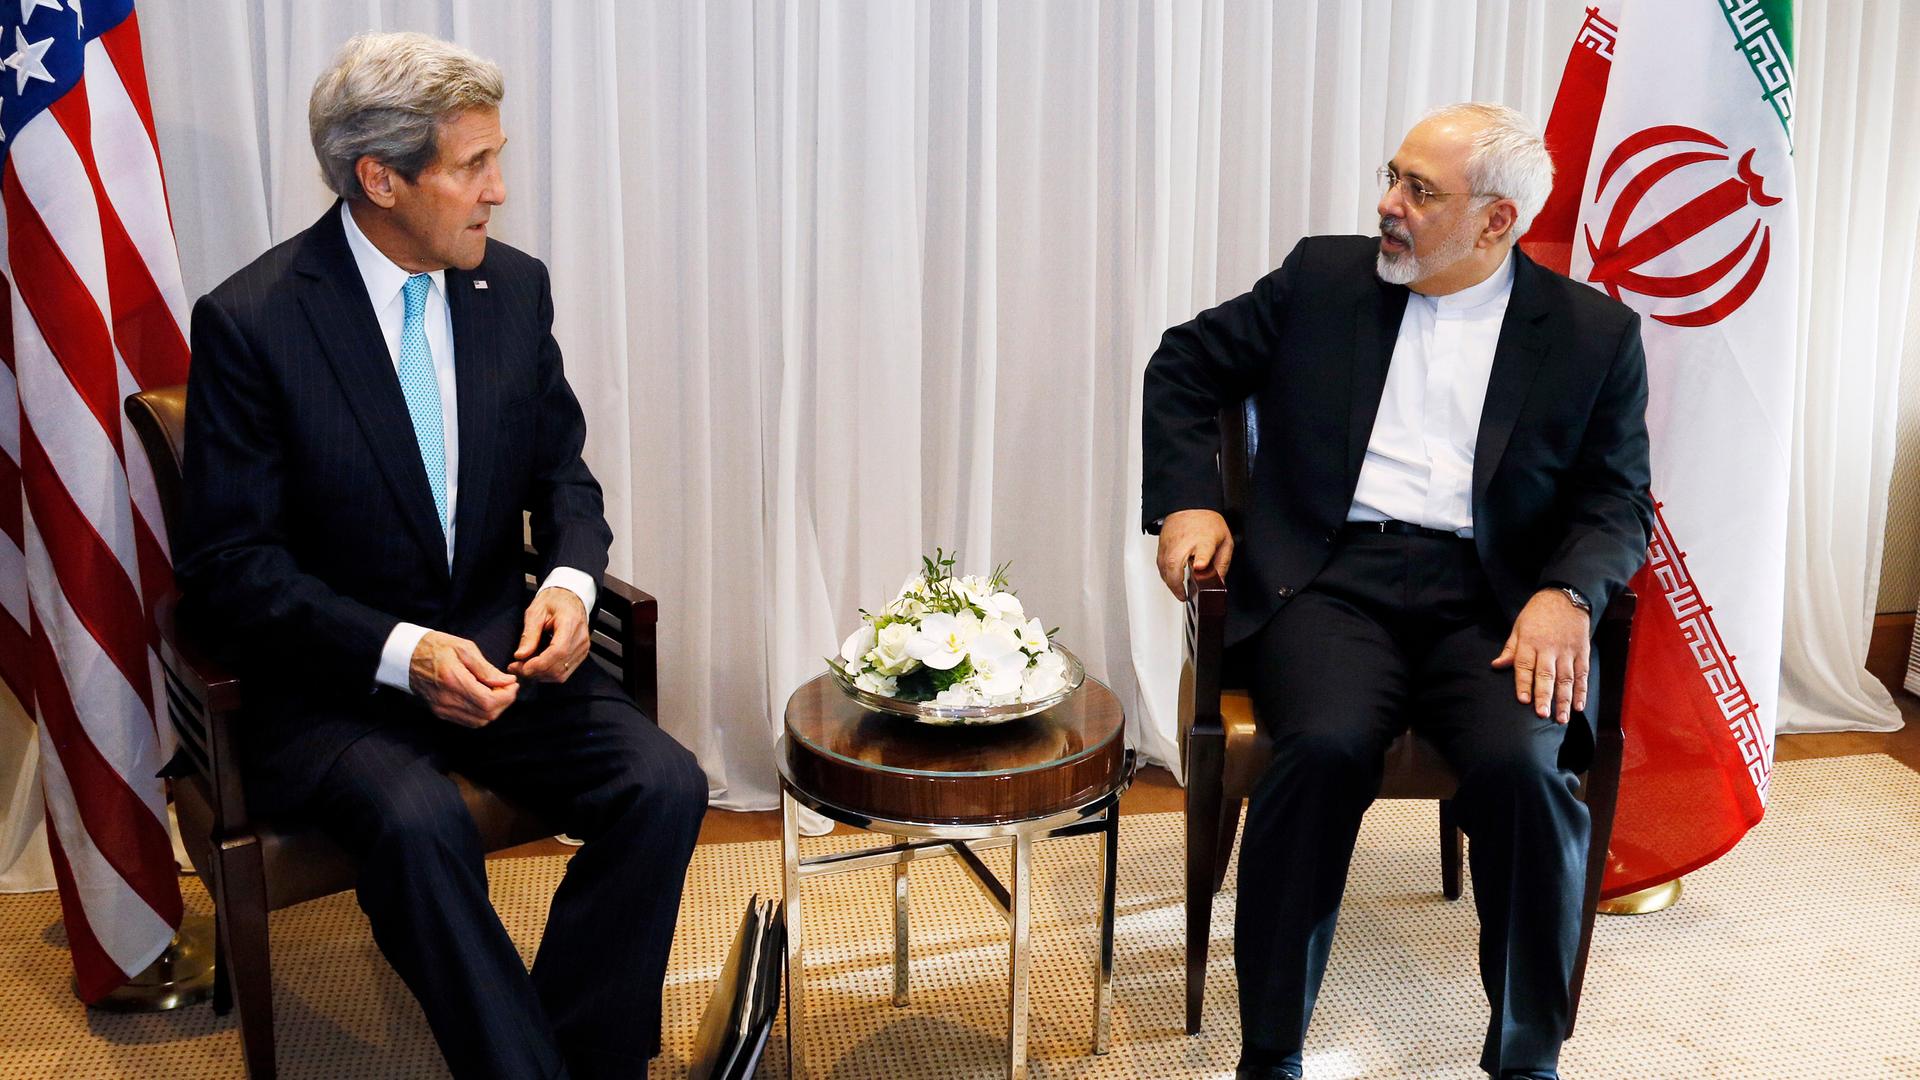 US Secretary of State John Kerry sits with Iranian Foreign Minister Mohammad Javad Zarif before a meeting in Geneva in January 2015. Zarif said that his meeting with Kerry was important to see if progress could be made in narrowing differences on his coun